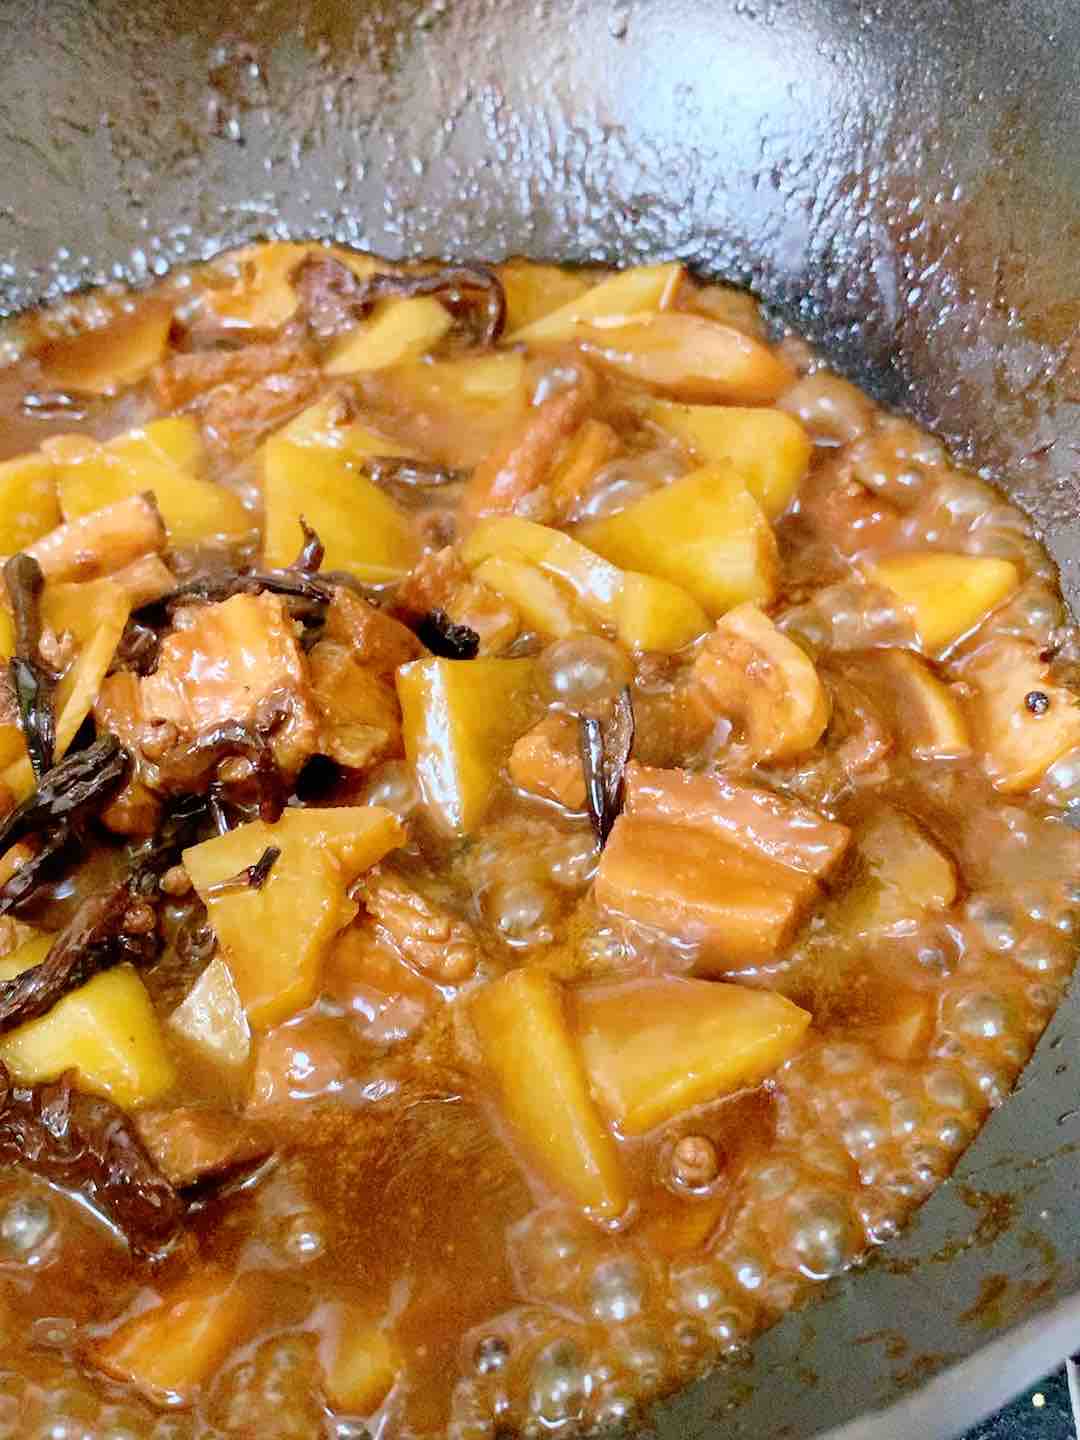 Don't Need to Fry Sugar-colored Homemade Braised Pork